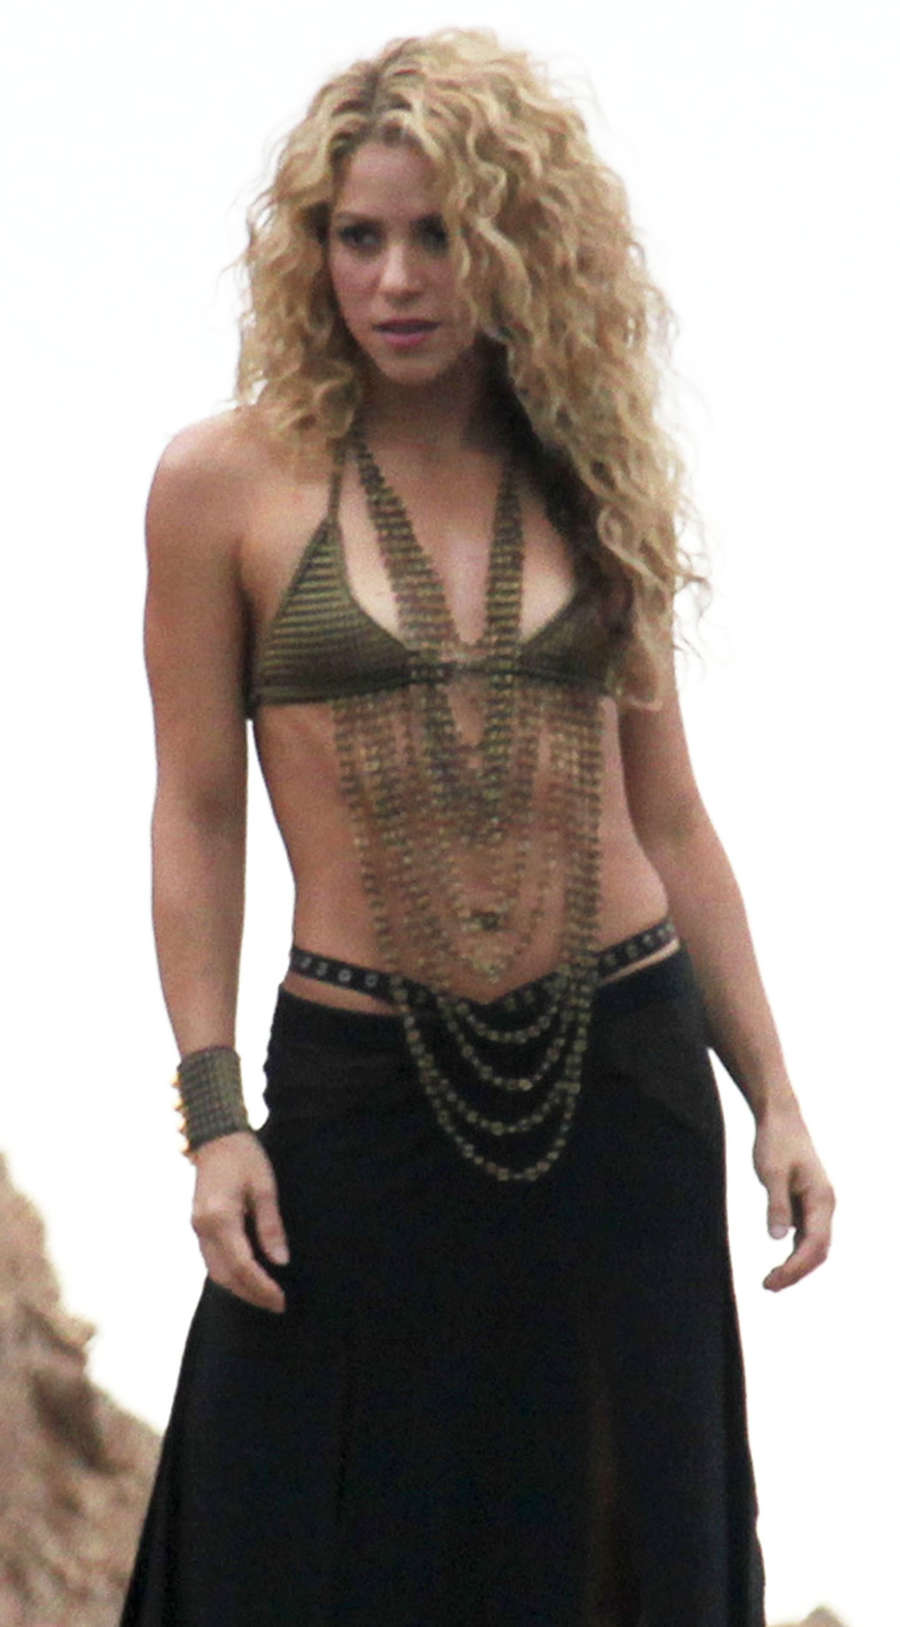 Shakira - Filming a commercial on the beach in Catalonia